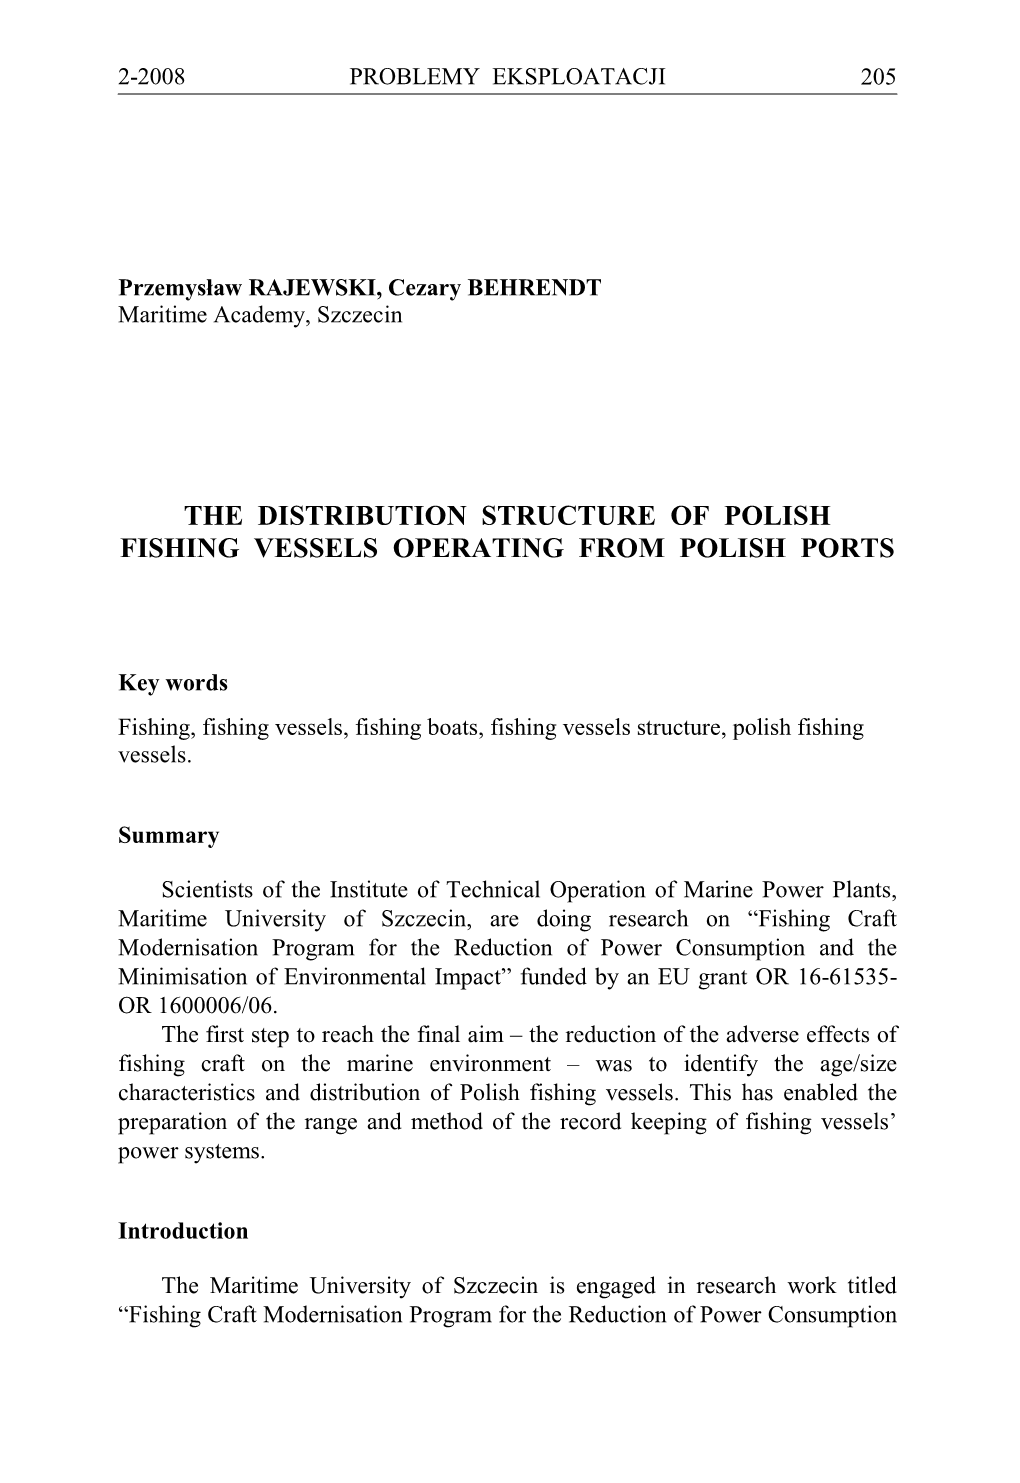 The Distribution Structure of Polish Fishing Vessels Operating from Polish Ports